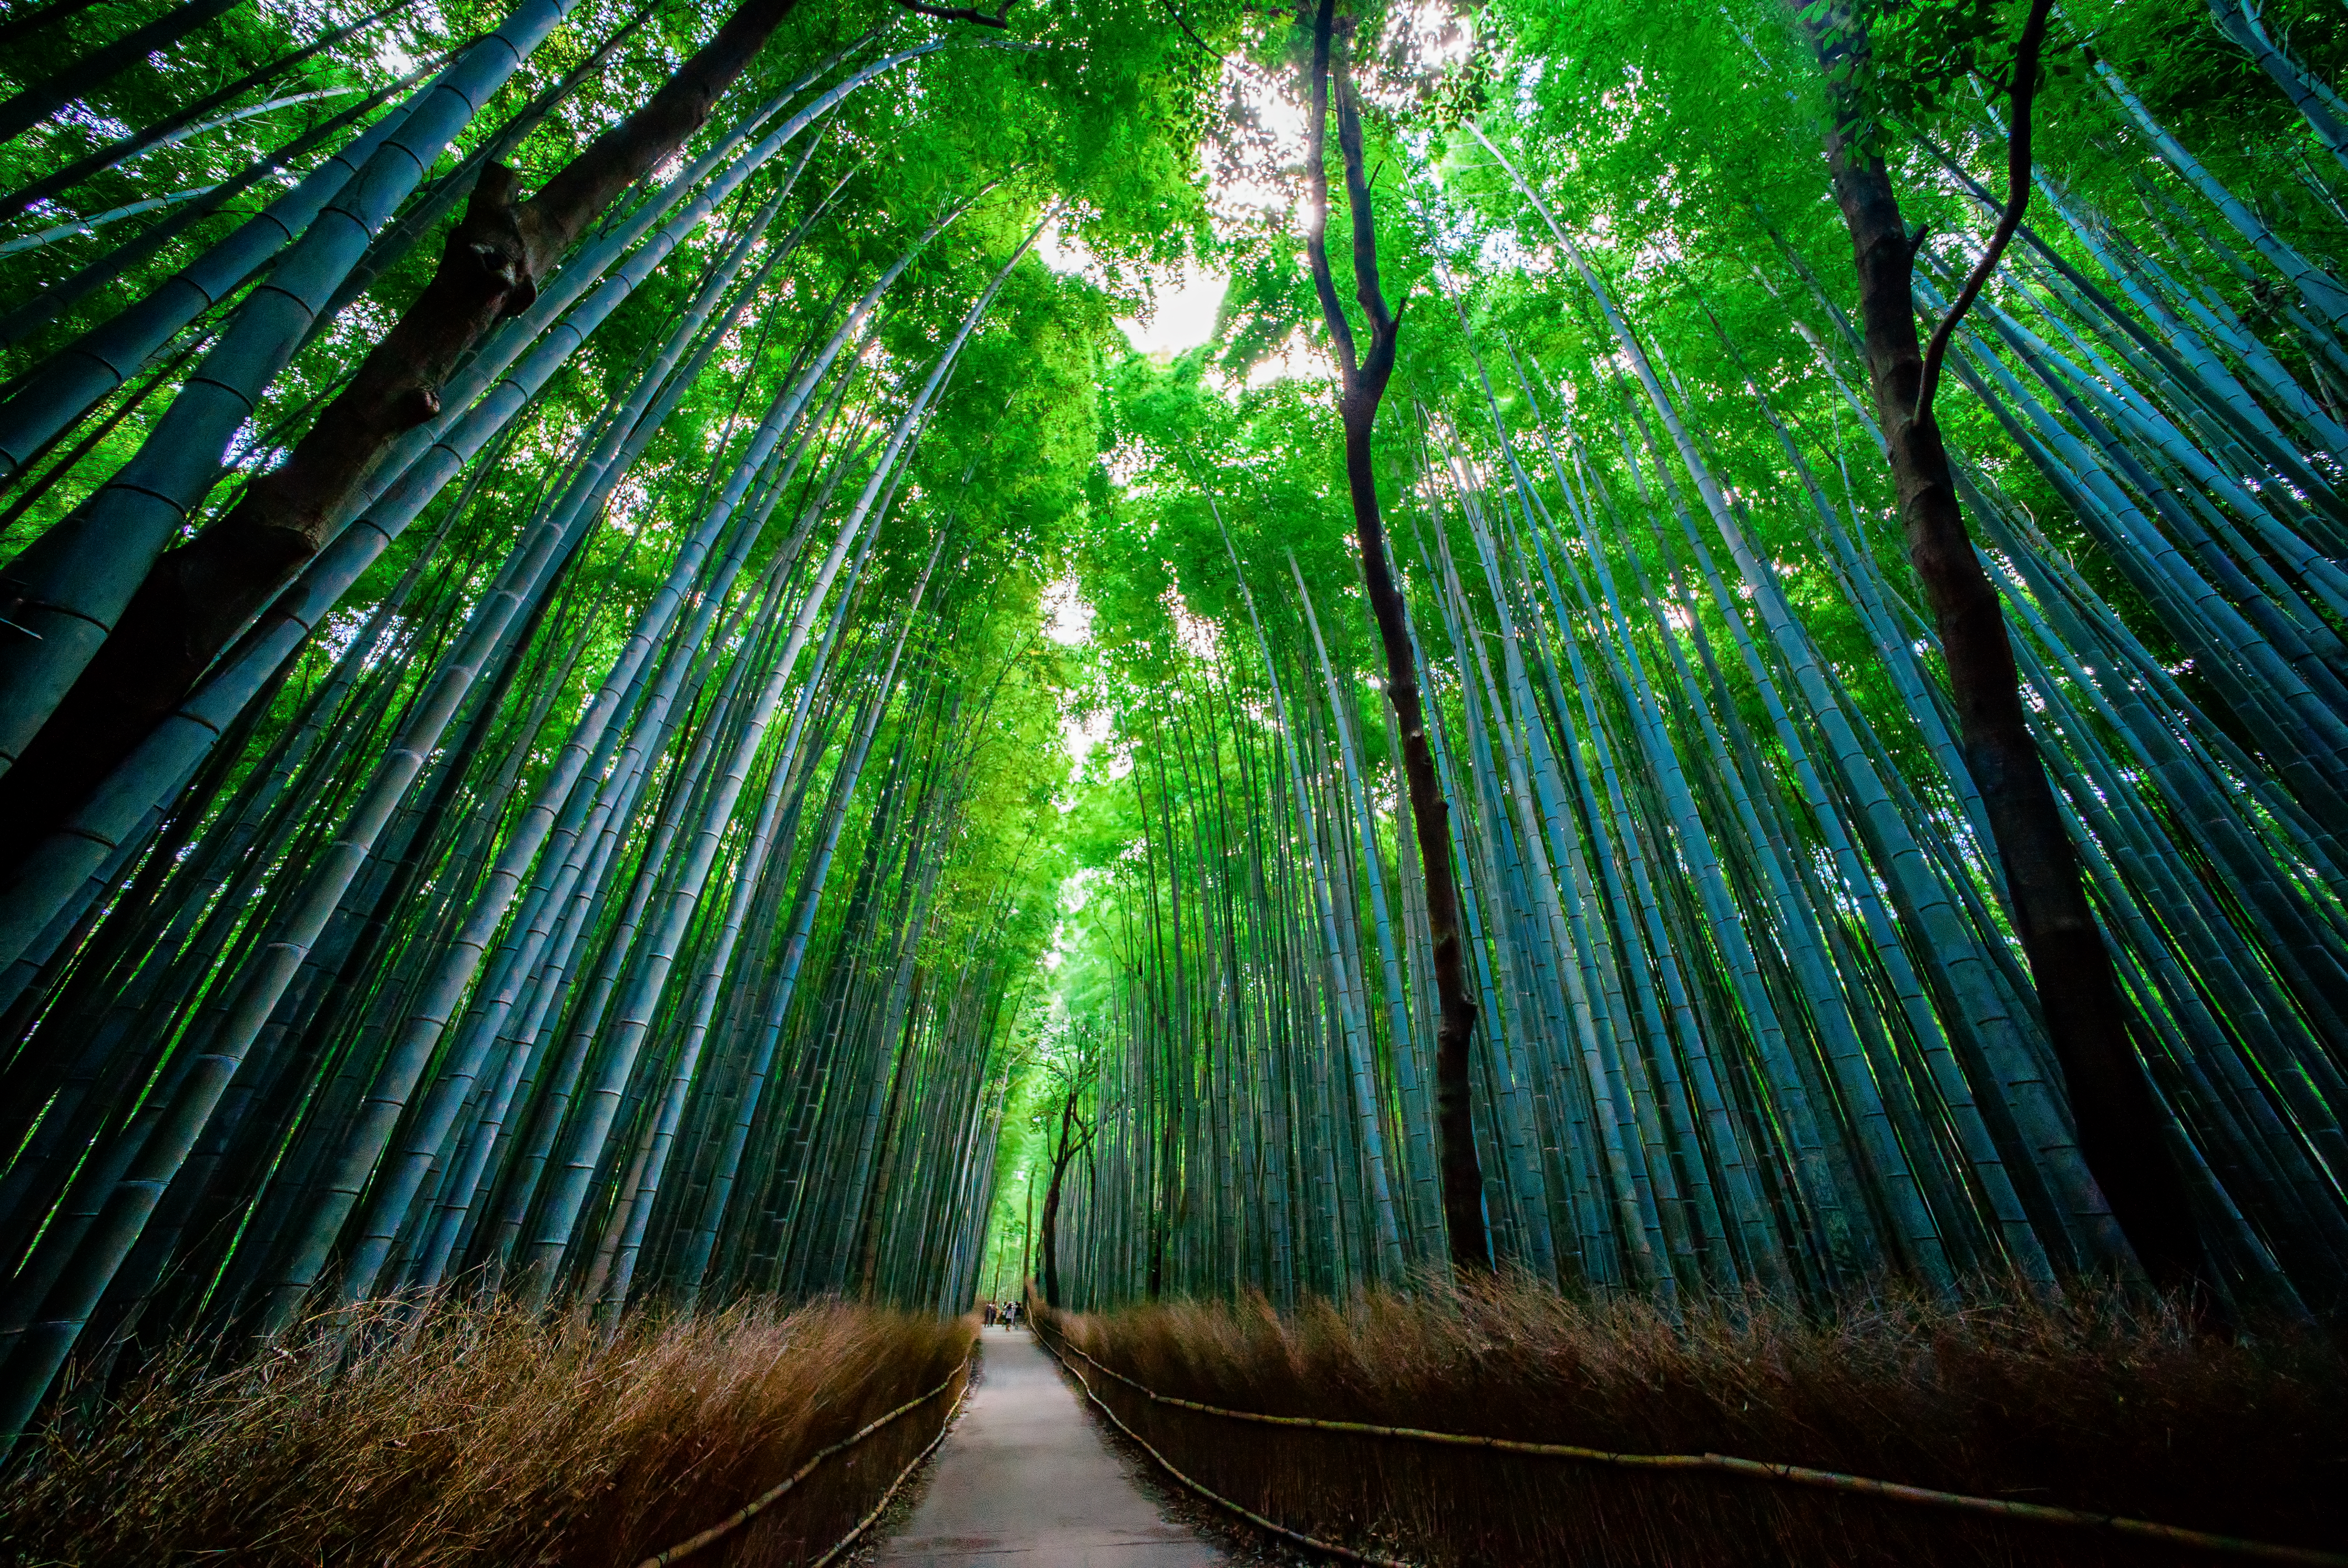 trees, nature, forest, bamboo, bottom view